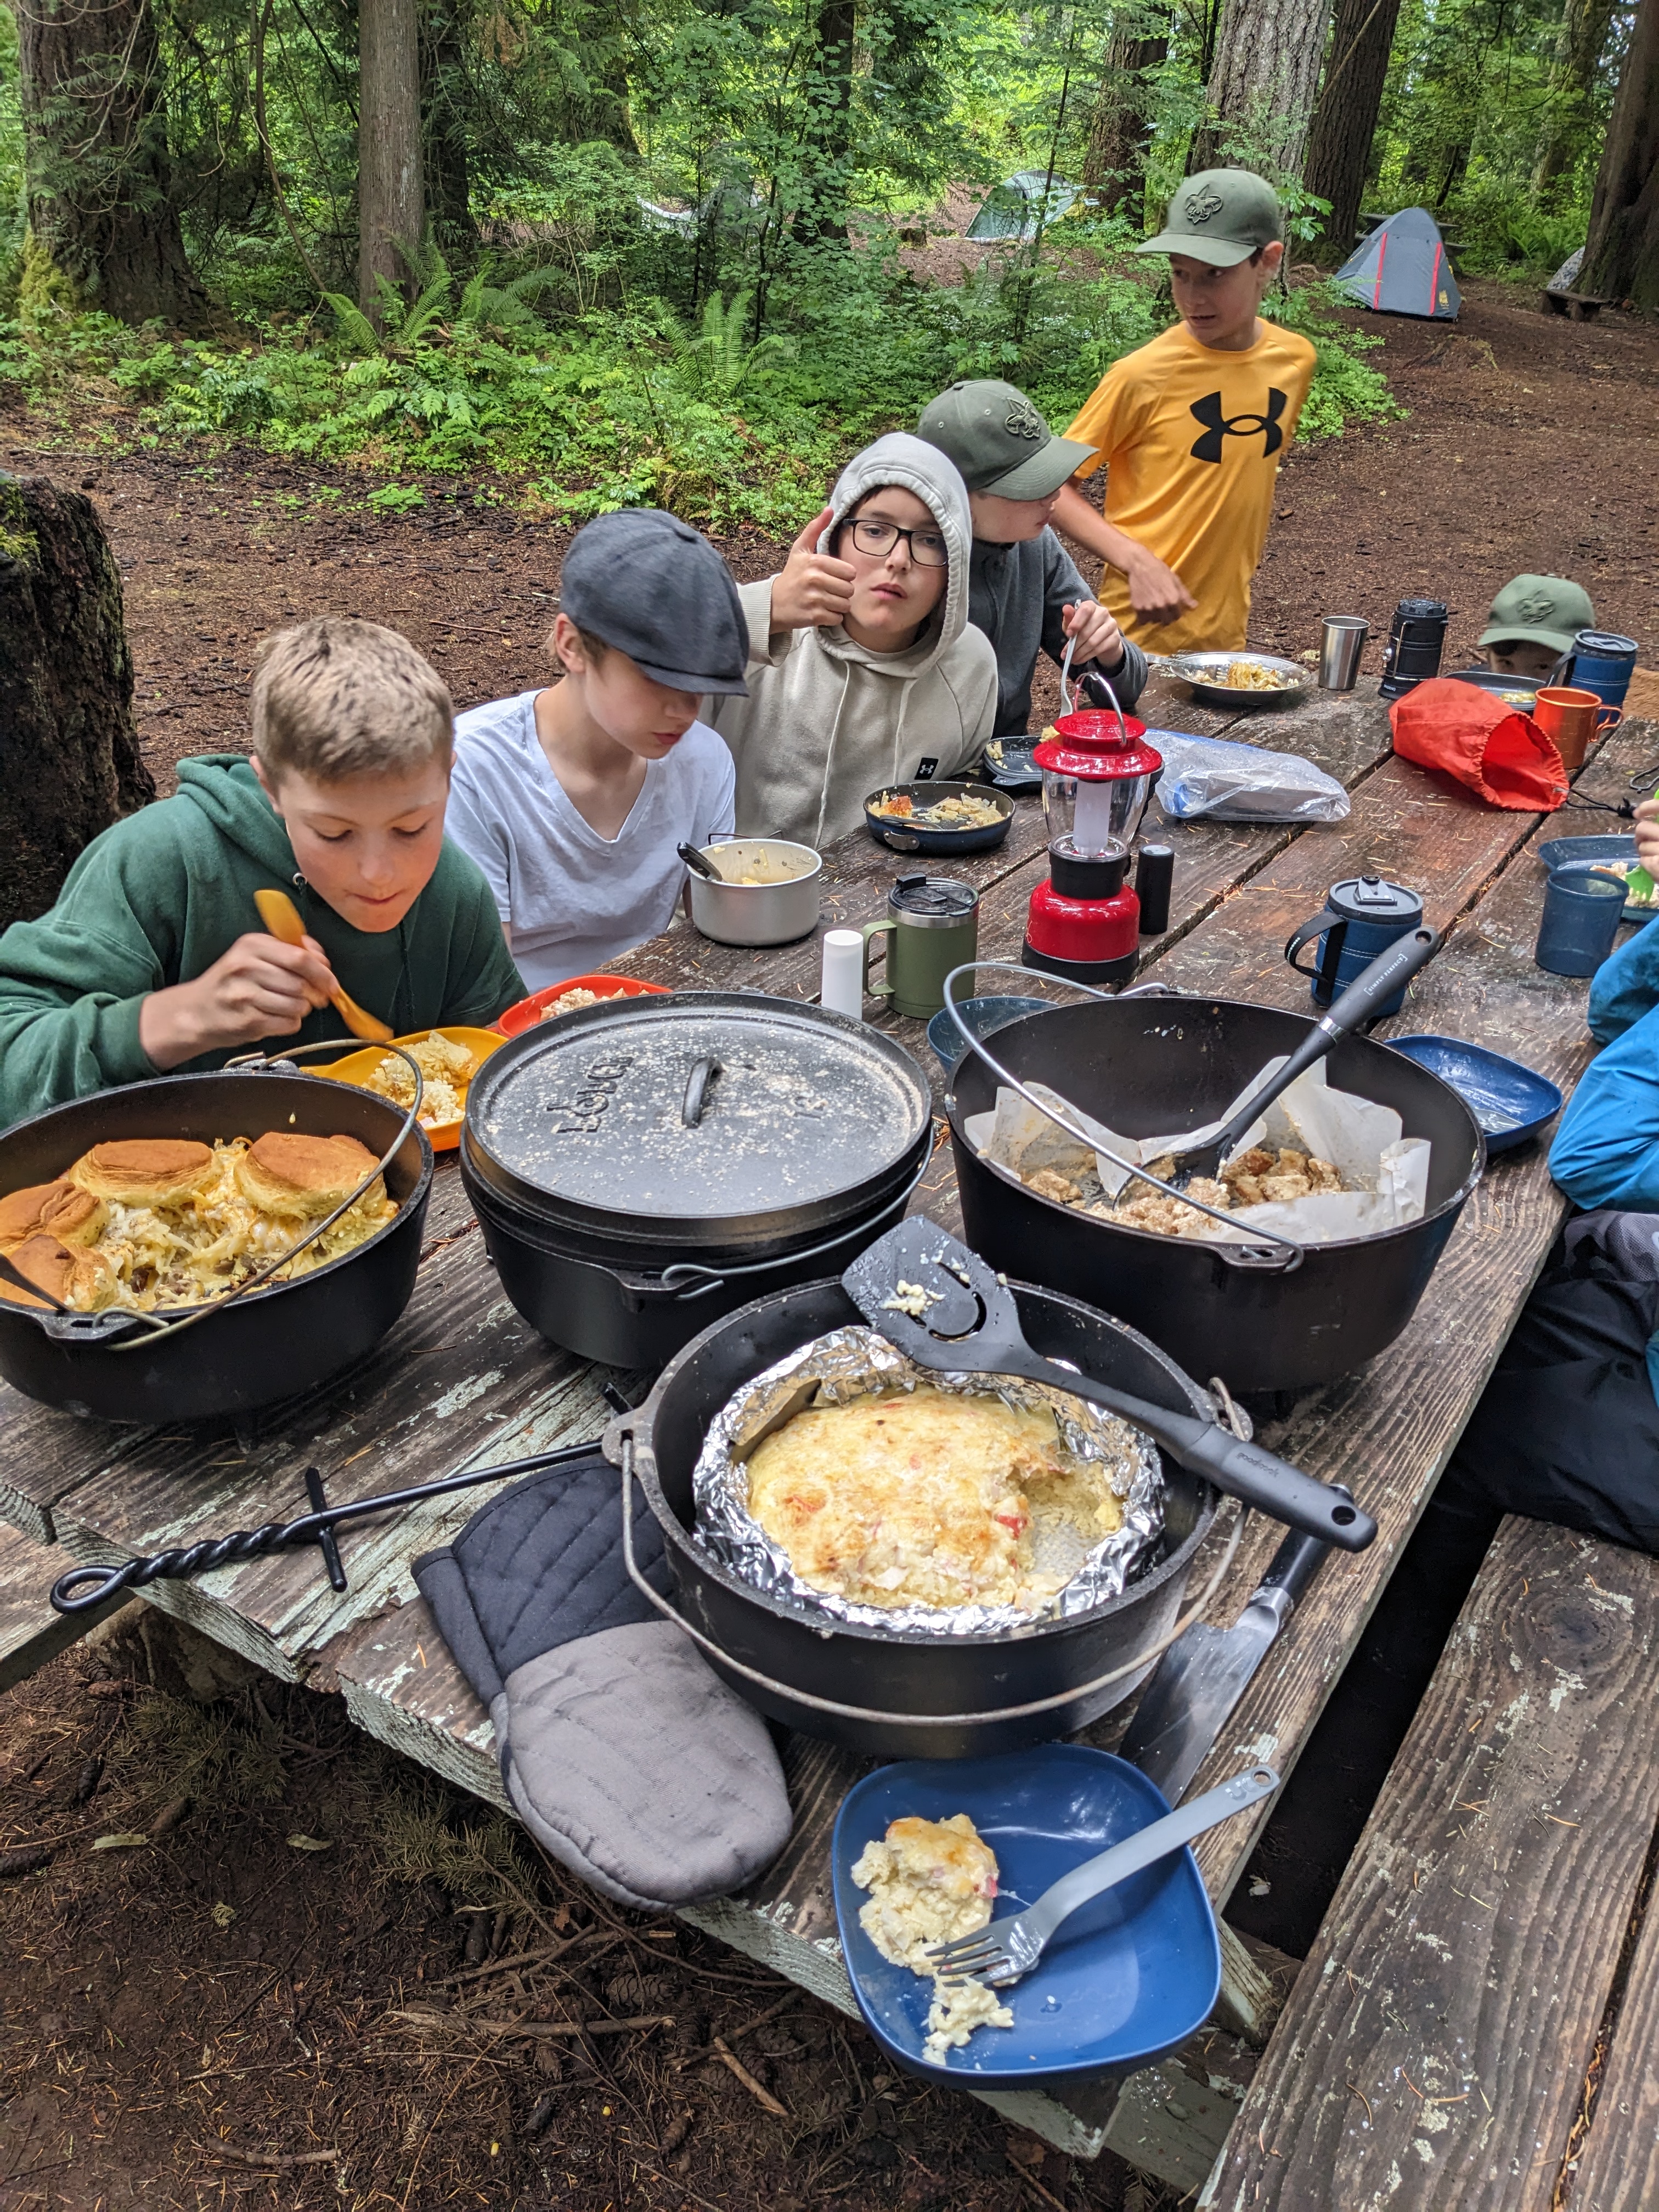 Scouts eating a meal